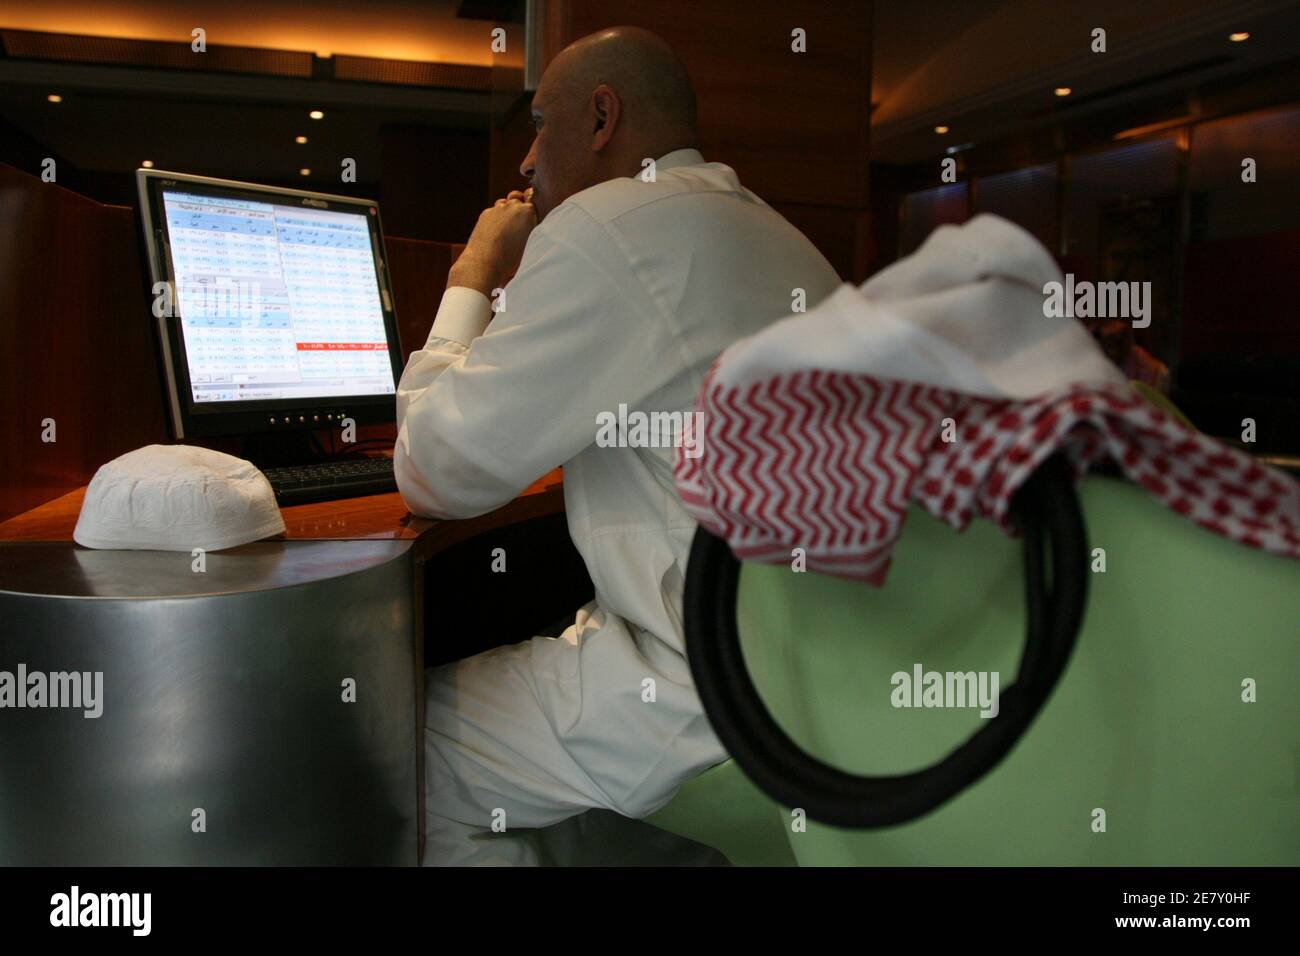 A Saudi trader works at the Saudi Investment Bank in Riyadh March 18, 2008. Saudi authorities hoped that encouraging mass participation in share ownership would help distribute the wealth from the current oil boom as world prices soar. But a stock market crash in 2006 and rising inflation in recent months have spread an atmosphere of gloom among ordinary Saudis. REUTERS/Fahad Shadeed    (SAUDI ARABIA) Stock Photo